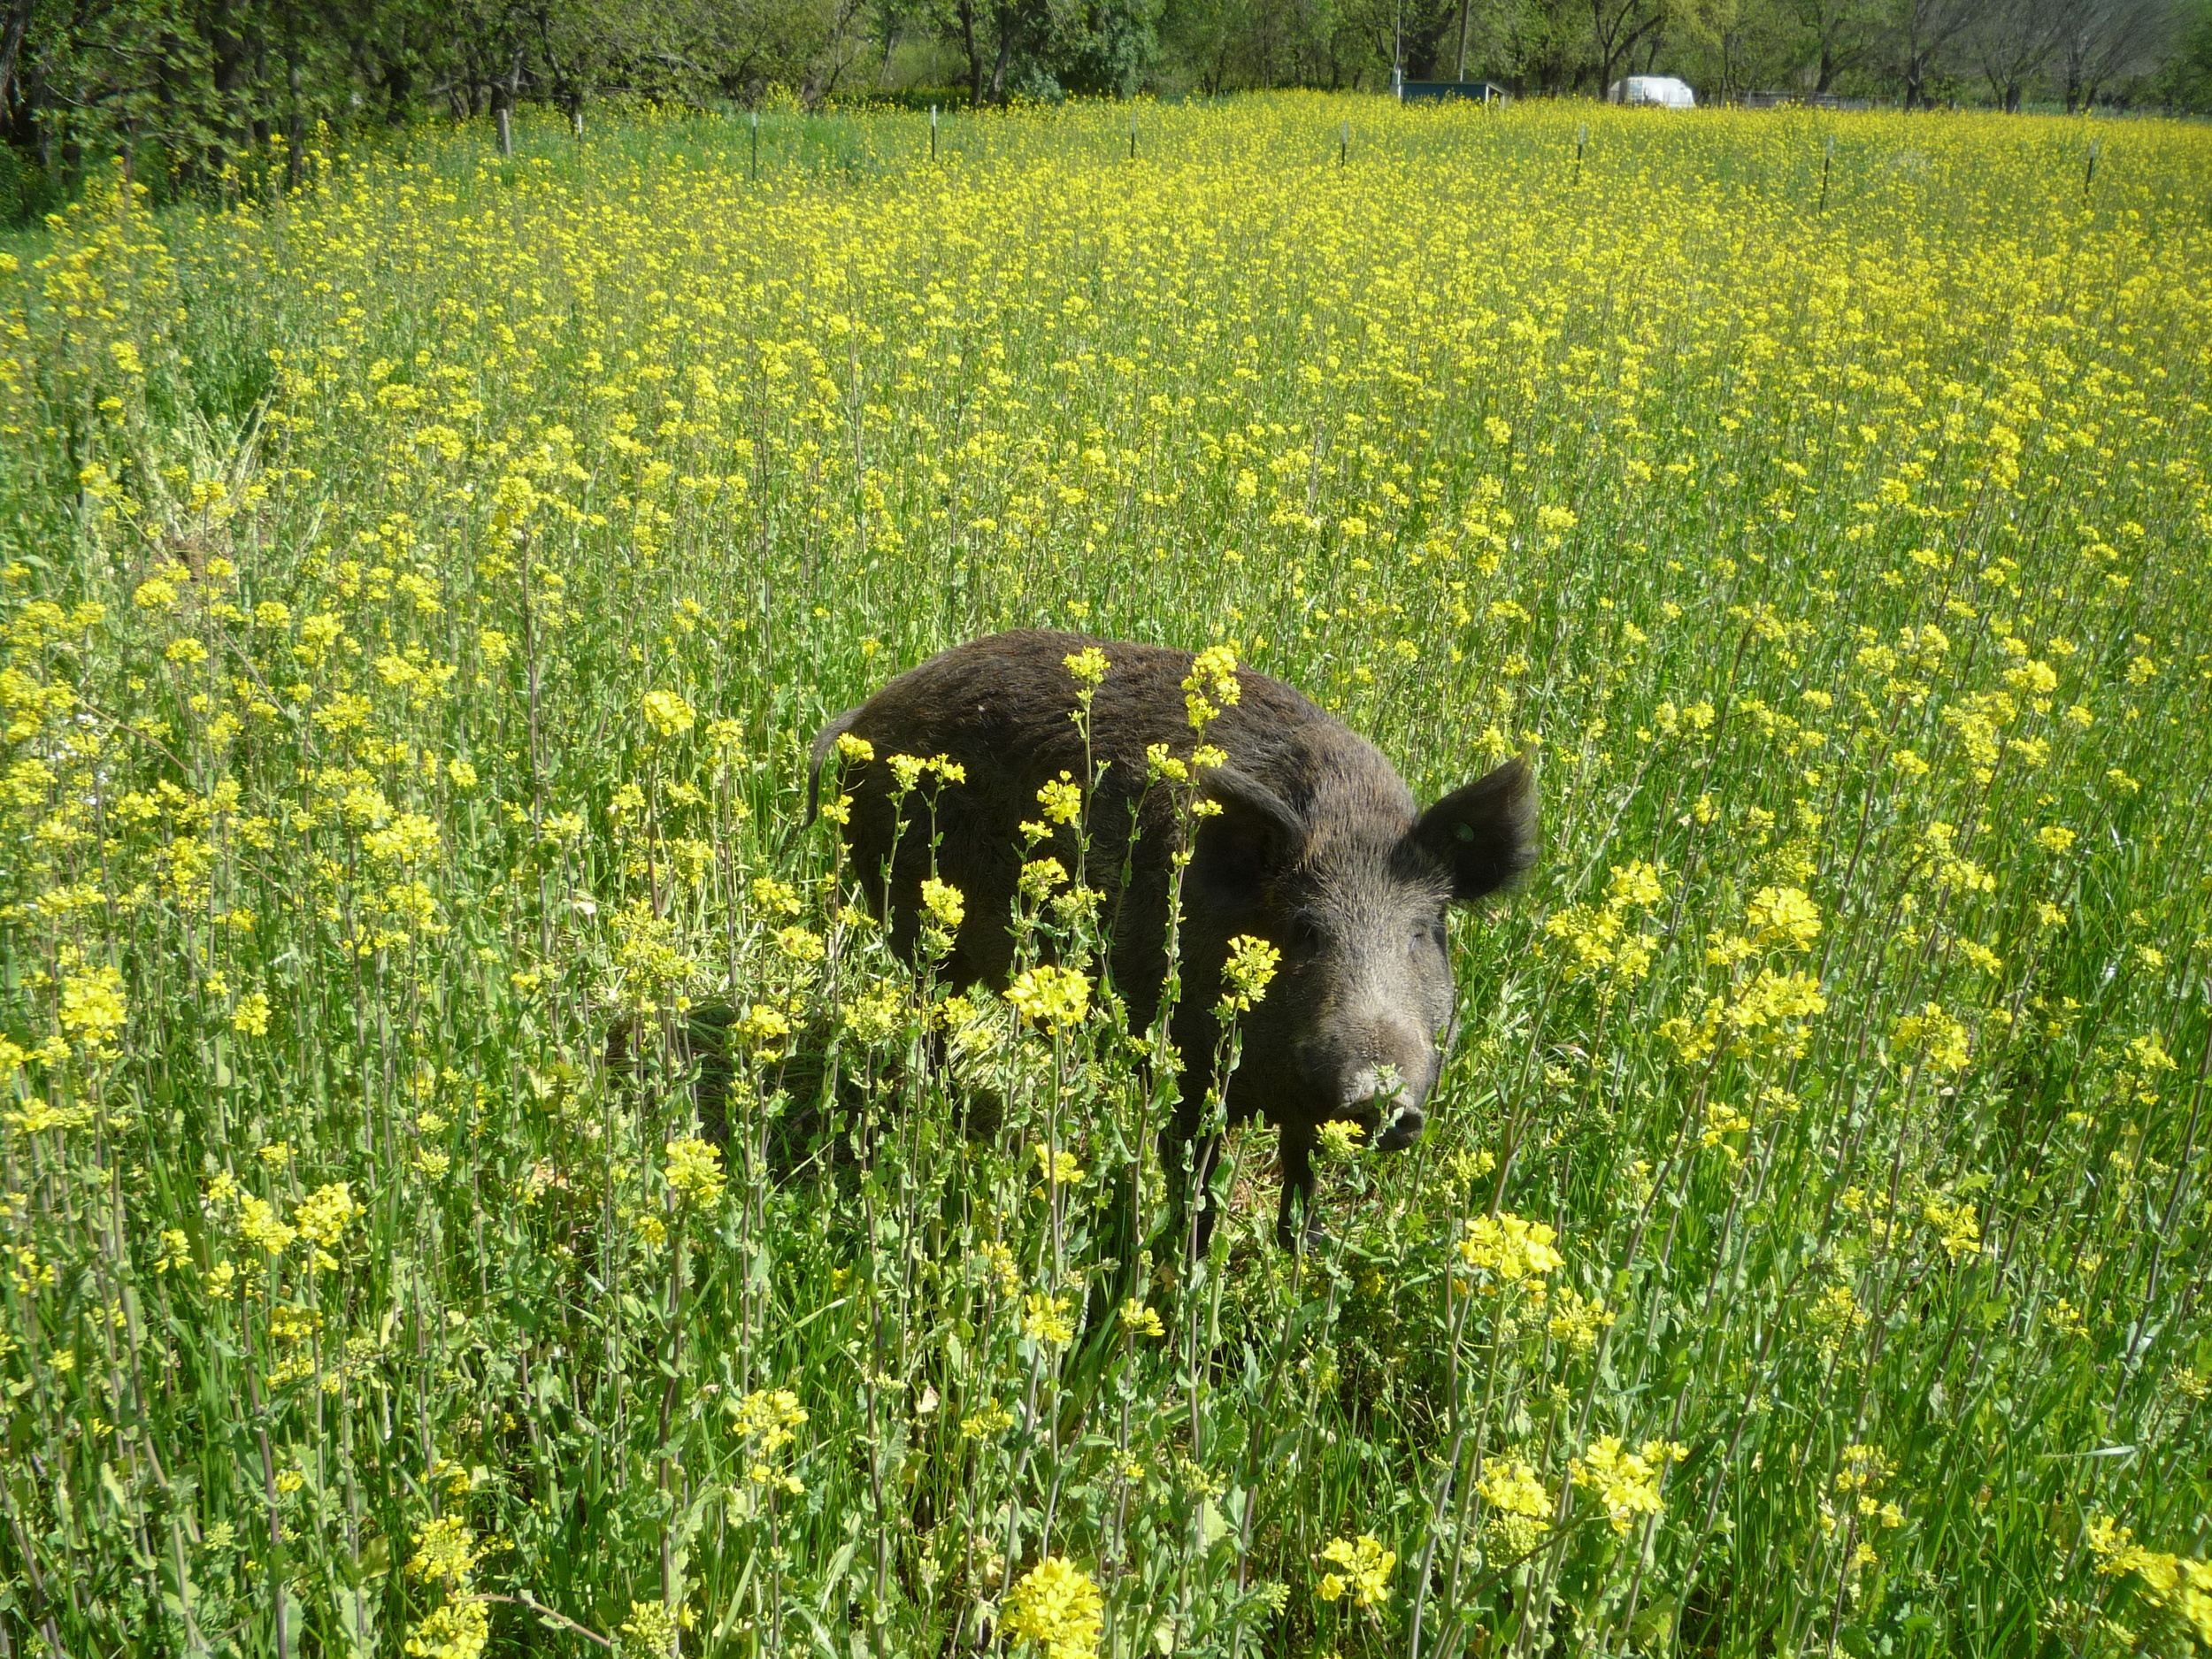 Stopping to enjoy the mustard flowers